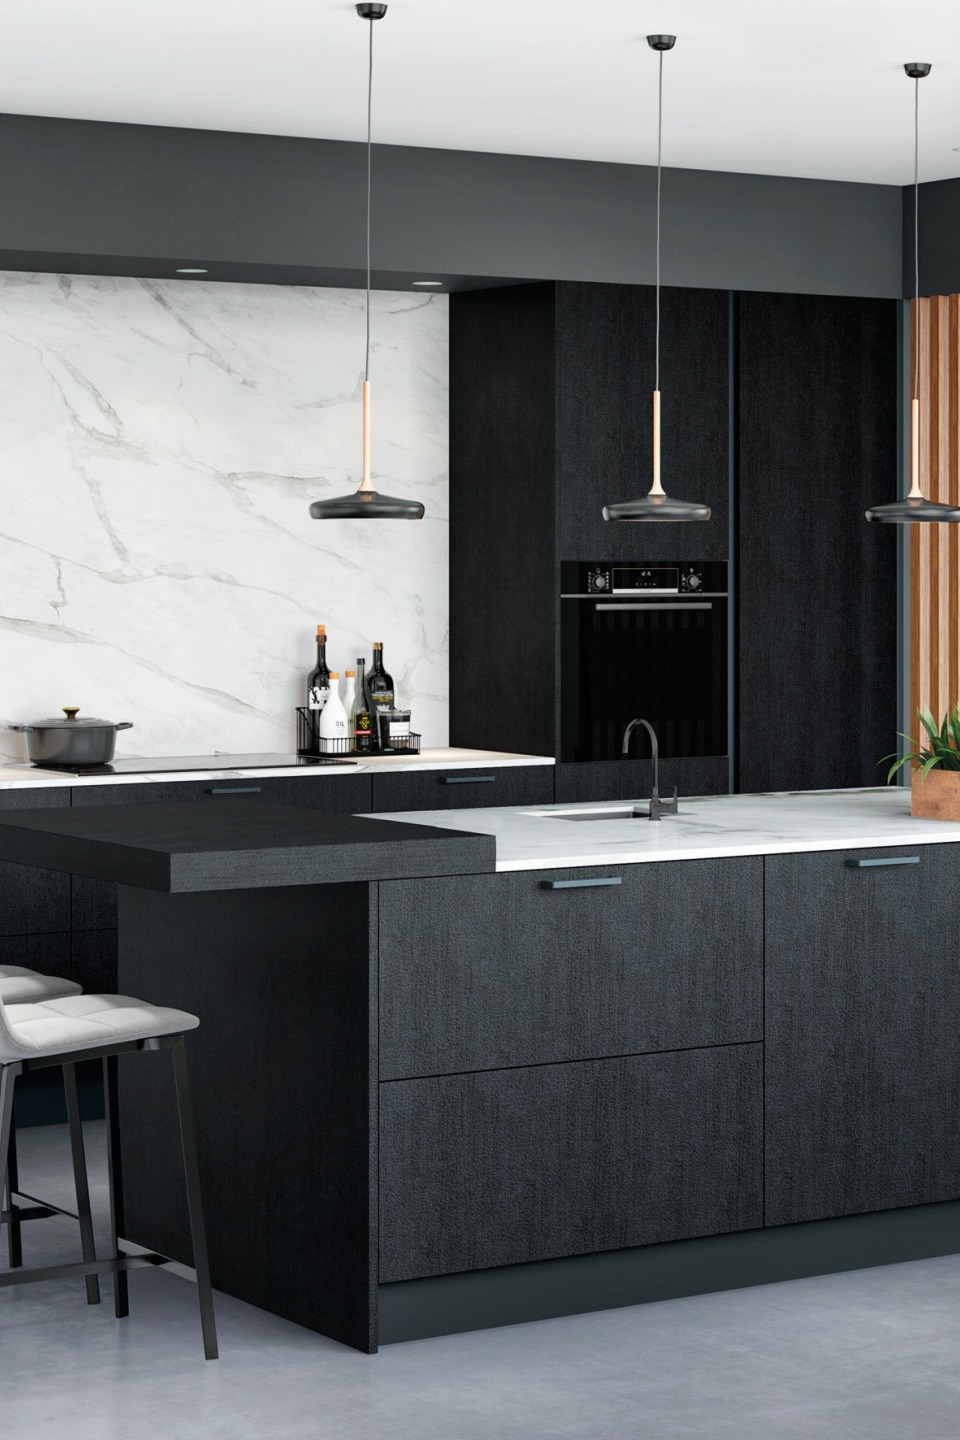 Kitchen Trends 2023 Space Black Cabinets Materials Marble Natural Lighting Kitchens Create